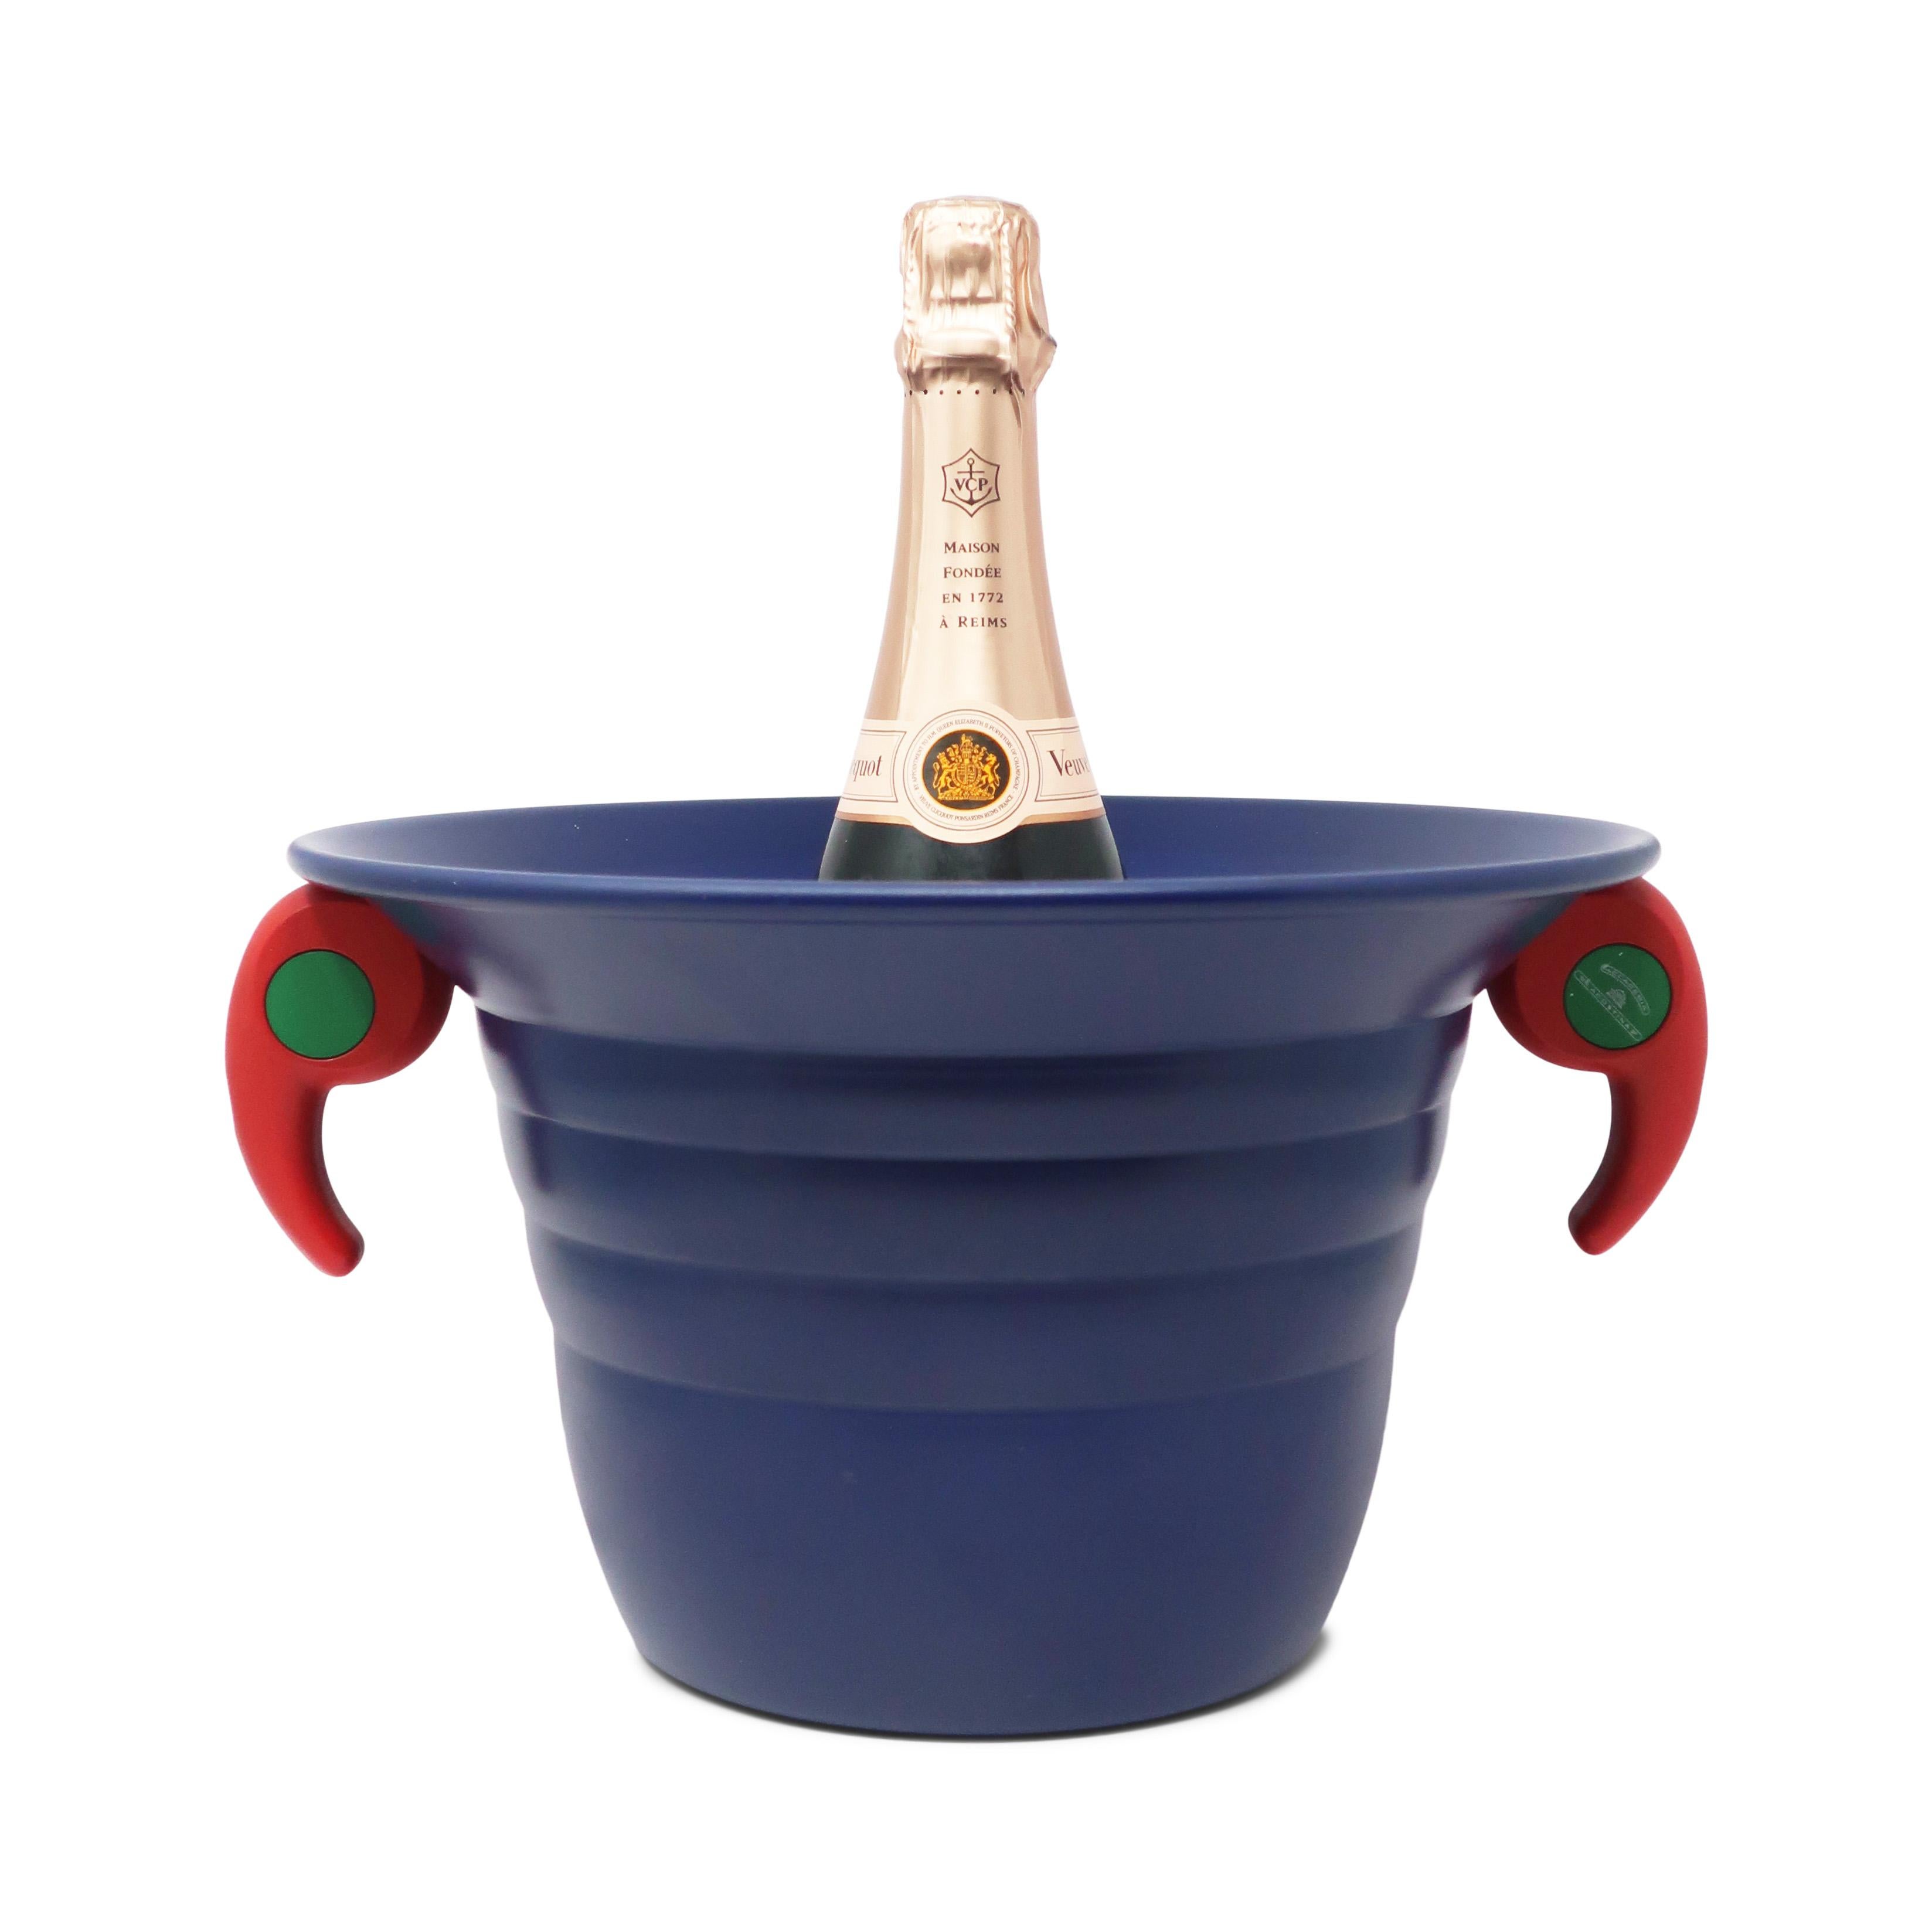 An iconic design by Gianfranco Gasparini from 1993 for Lagostina Academia, the Sally can serve as both a pasta pot and a champagne ice bucket. An obviously Memphis-inspried design it is constructed of aluminum with heat resistant plastic handles and